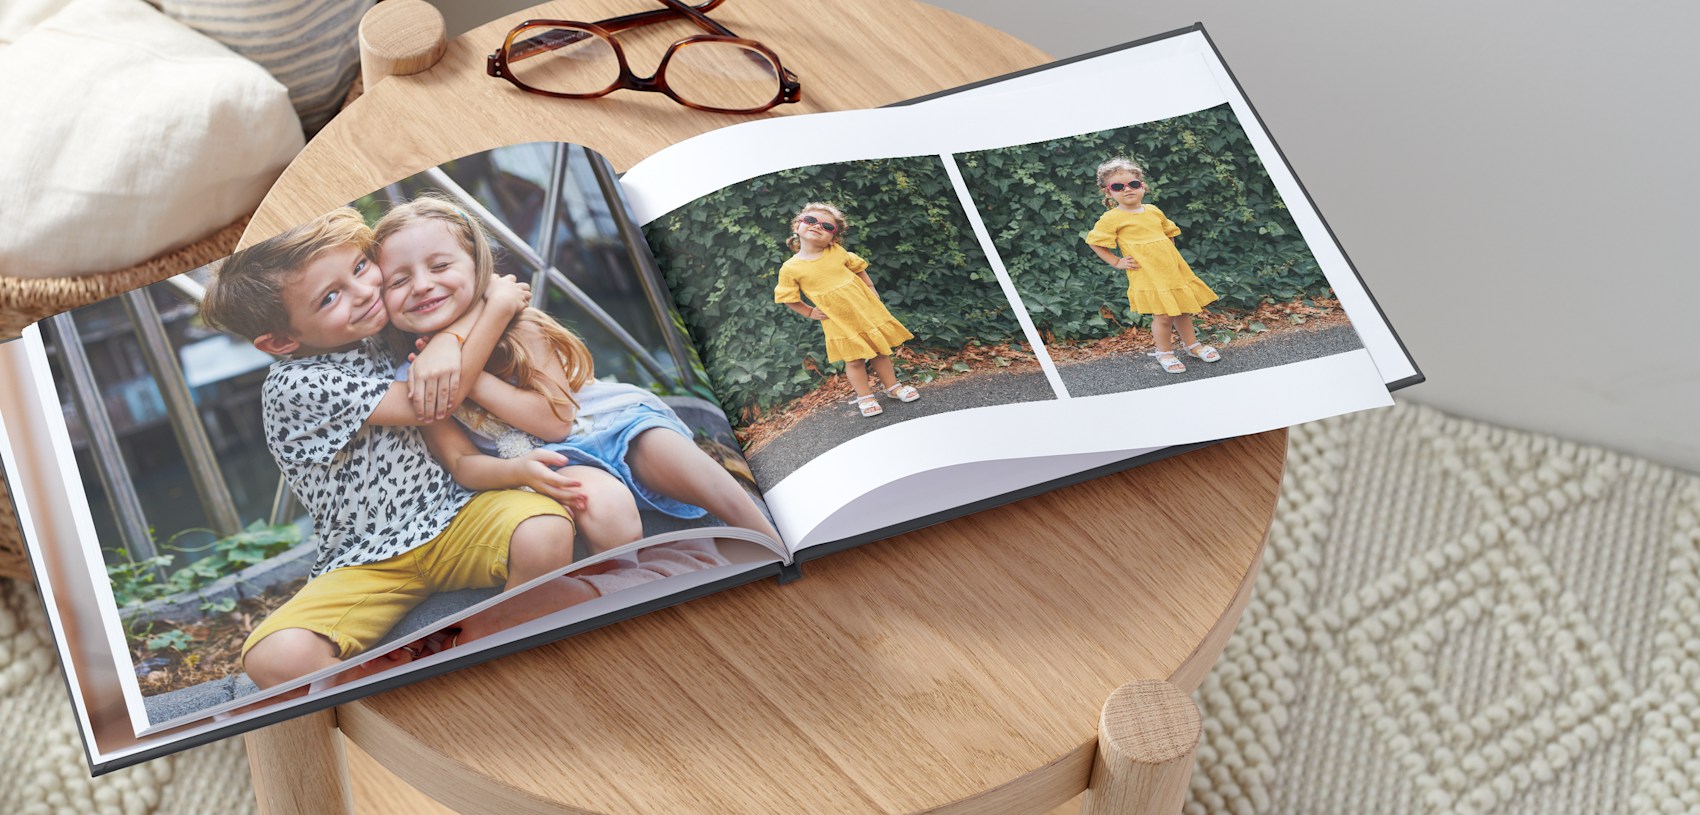 photo book with picture of two young children hugging